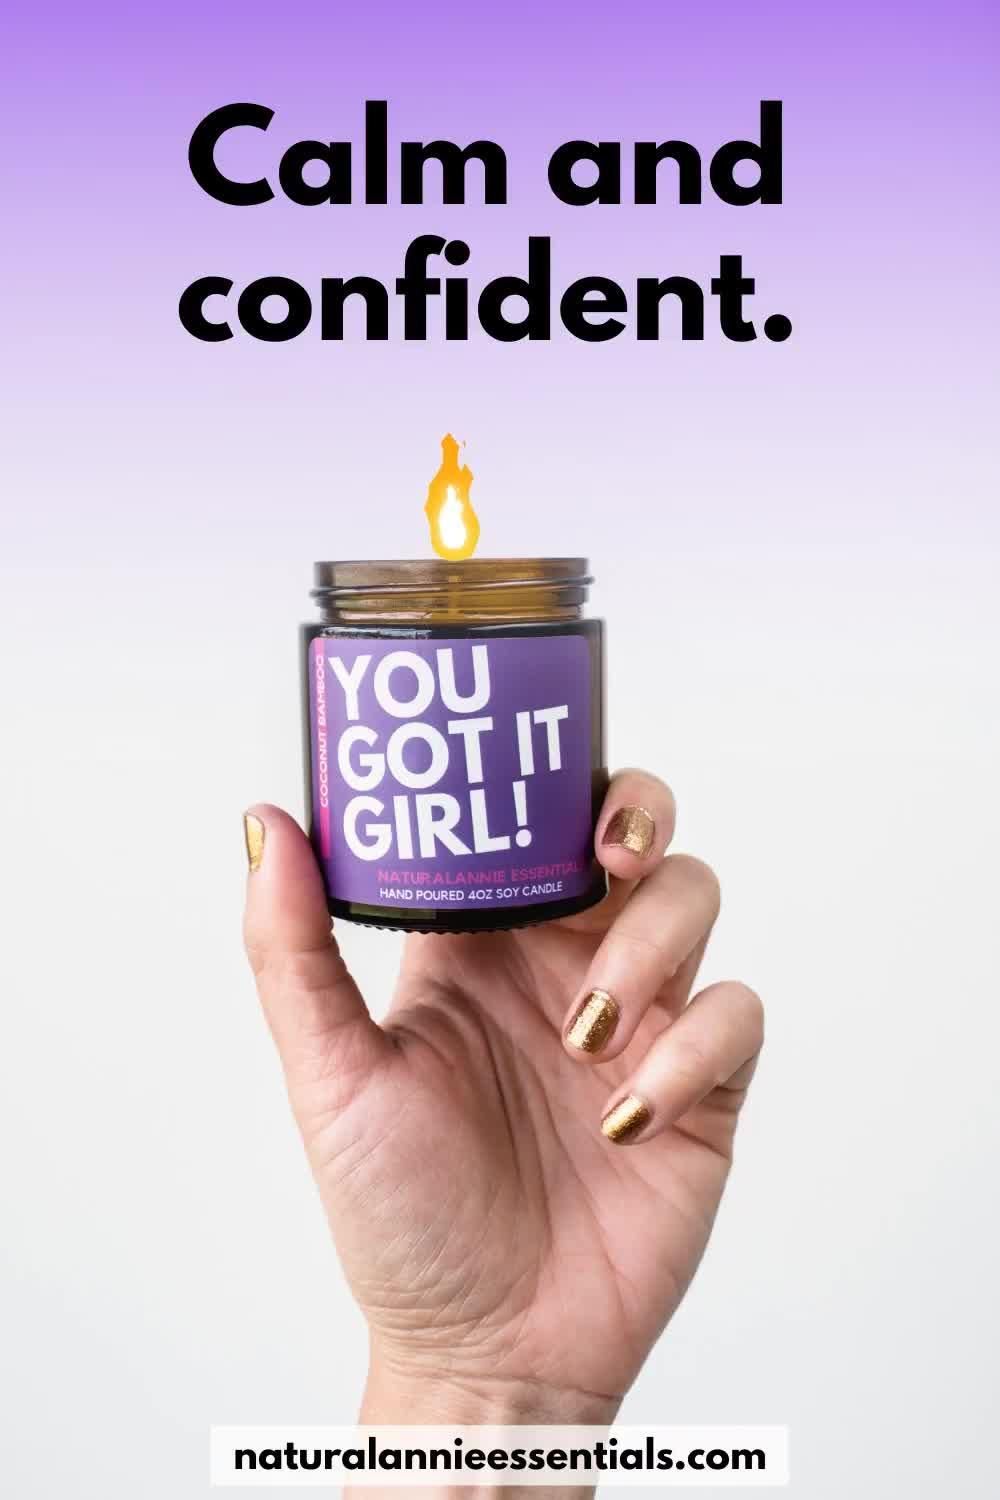 YOU GOT IT GIRL! Coconut and Bamboo Scented Soy Candle - YOU GOT IT GIRL! Coconut and Bamboo Scented Soy Candle -   19 diy Candles bath and body works ideas